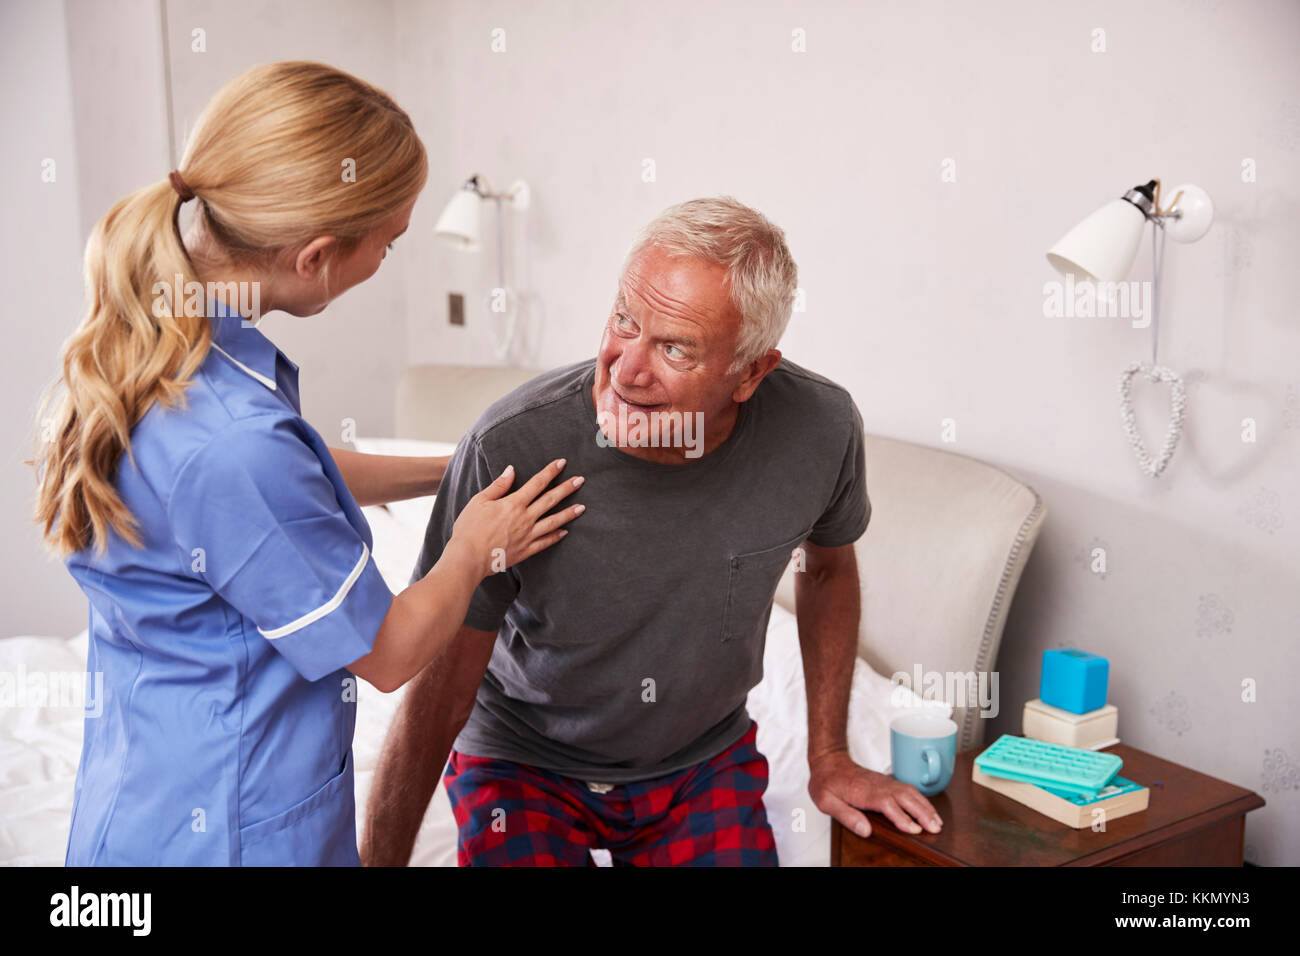 Nurse Helping Senior Man Out Of Bed On Home Visit Stock Photo